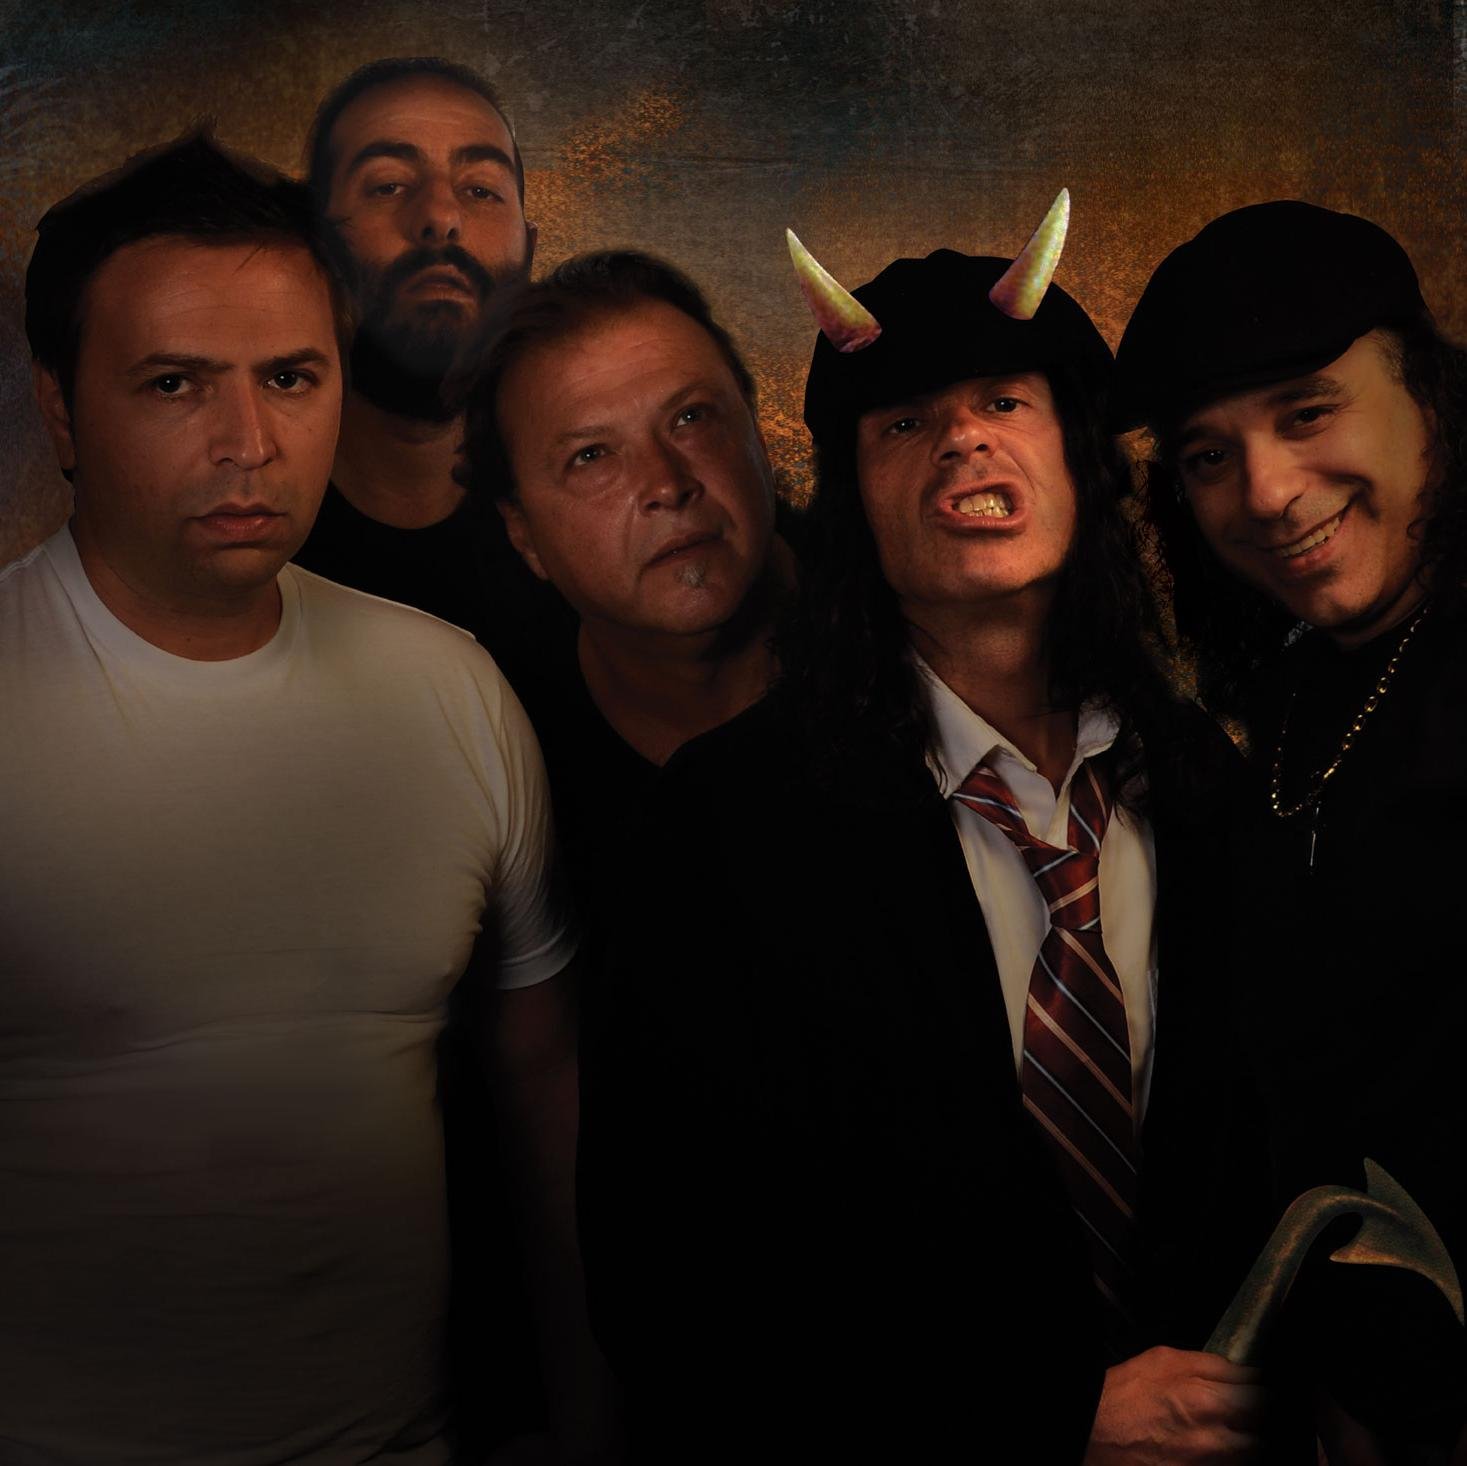 AN EXPLOSIVE TRIBUTE TO AC/DC